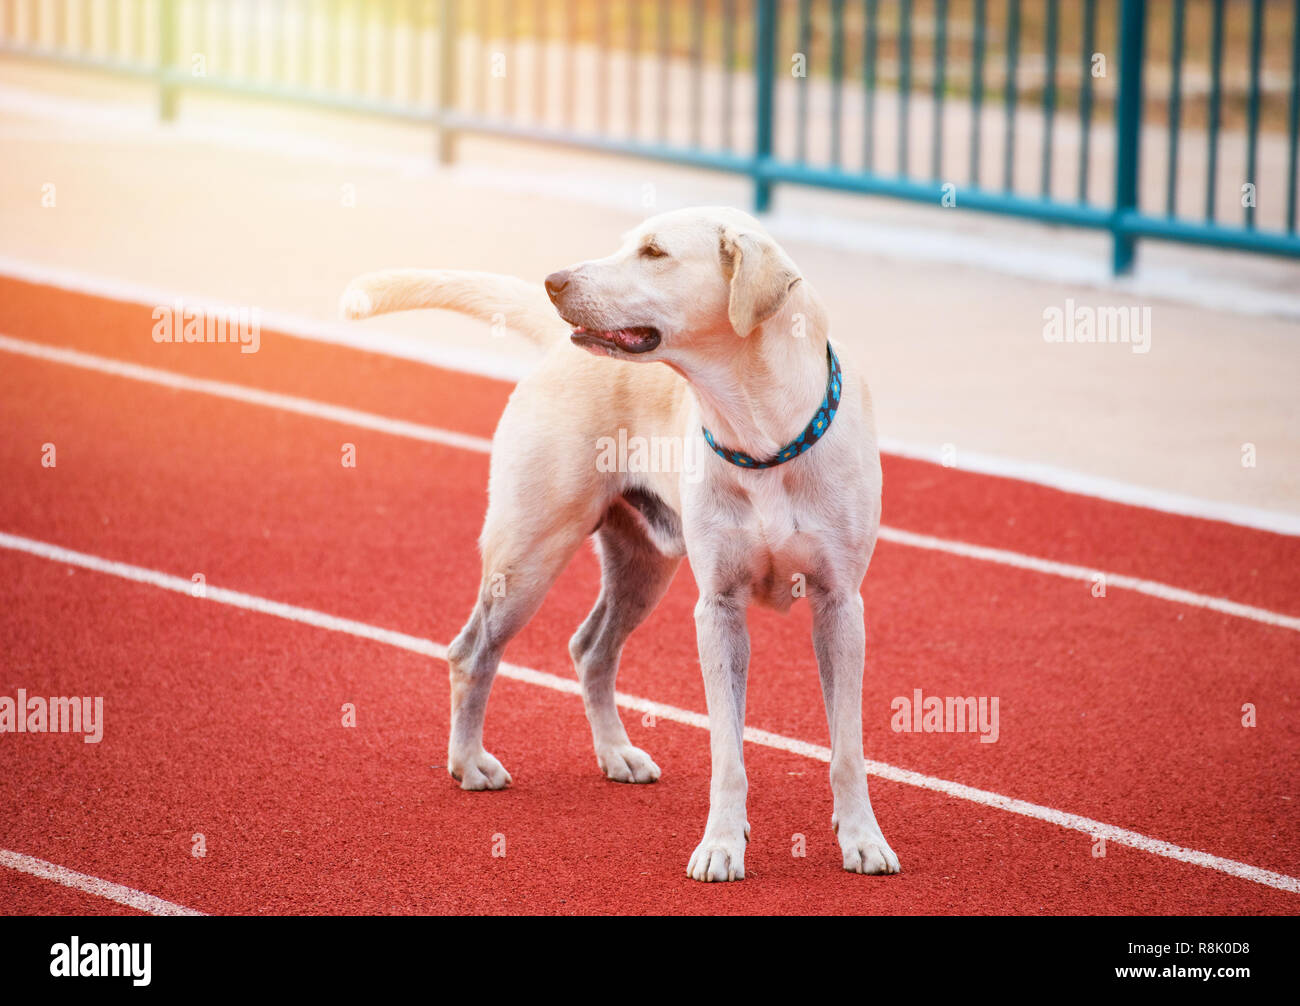 are labradors athletic